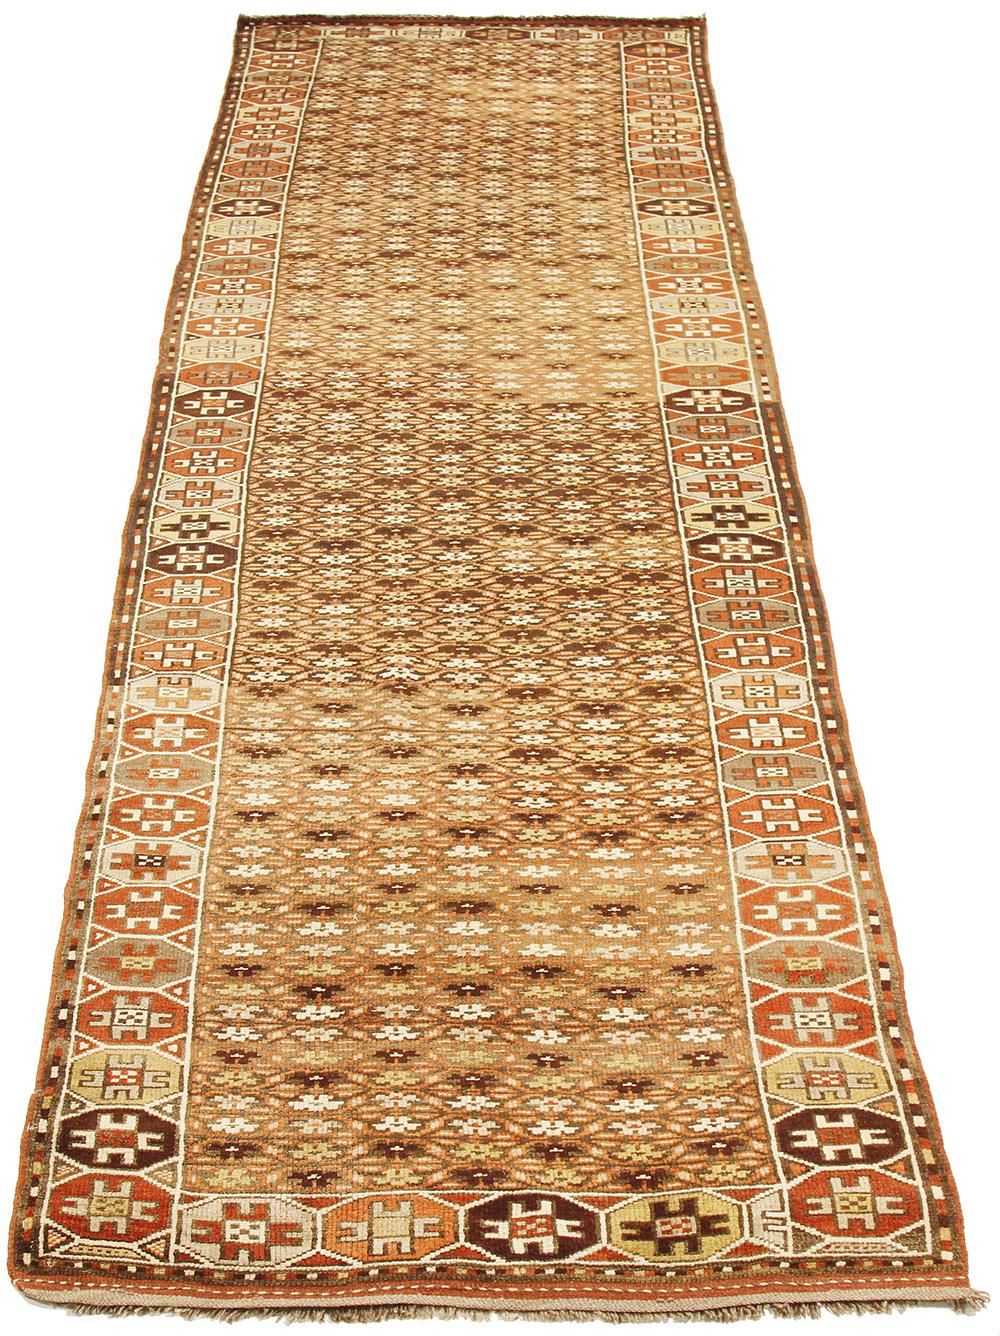 Antique Azerbaijan rug handwoven from the finest sheep’s wool and colored with all-natural vegetable dyes that are safe for humans and pets. It’s a traditional Azerbaijani design featuring mixed floral and geometric details in brown and ivory over